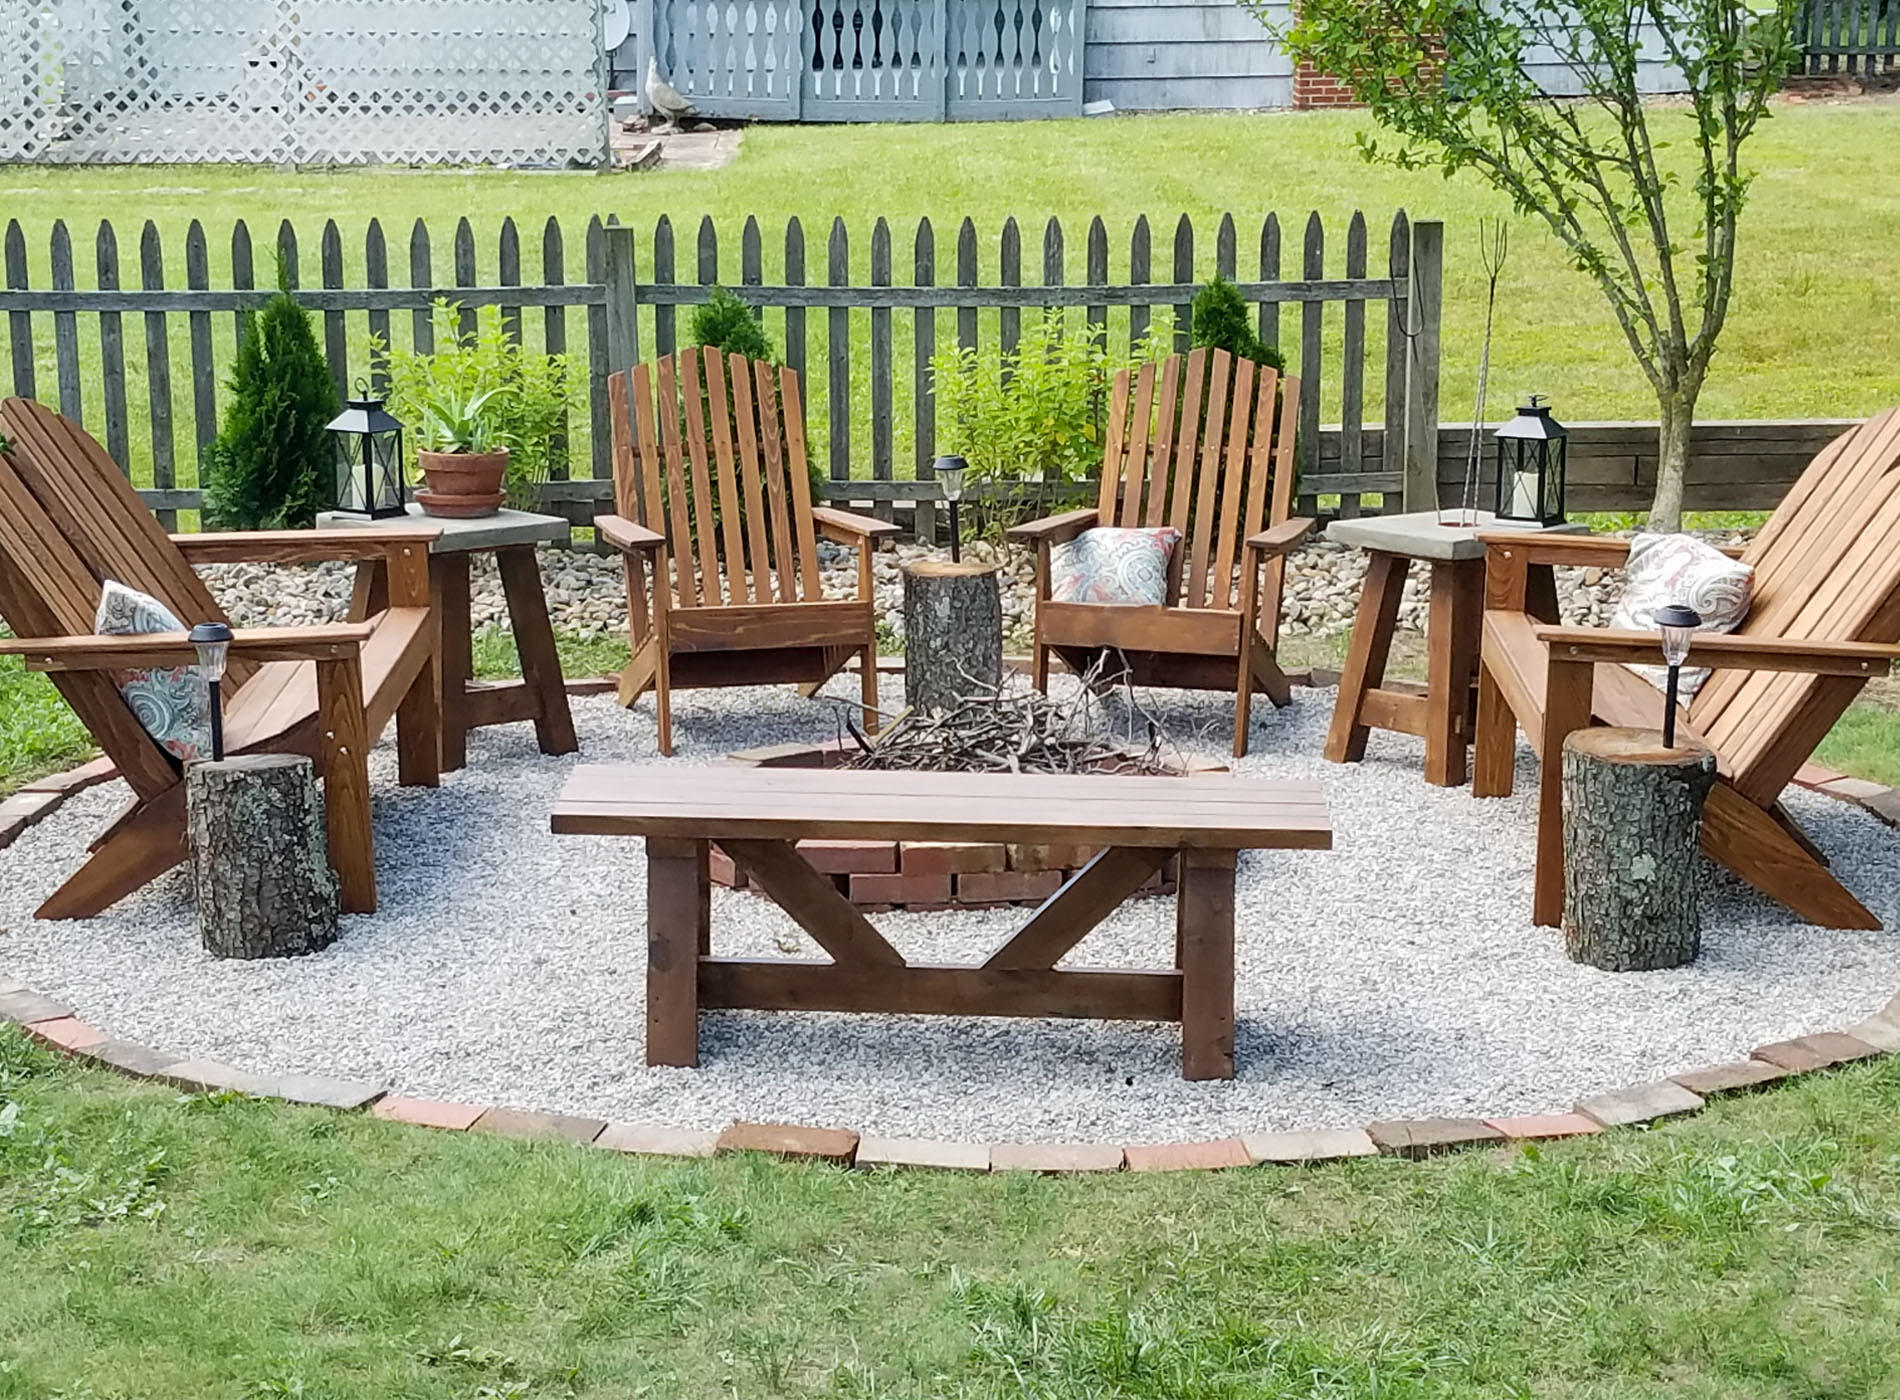 Featured DIY Fire Pit by Prodigal Pieces | prodigalpieces.com